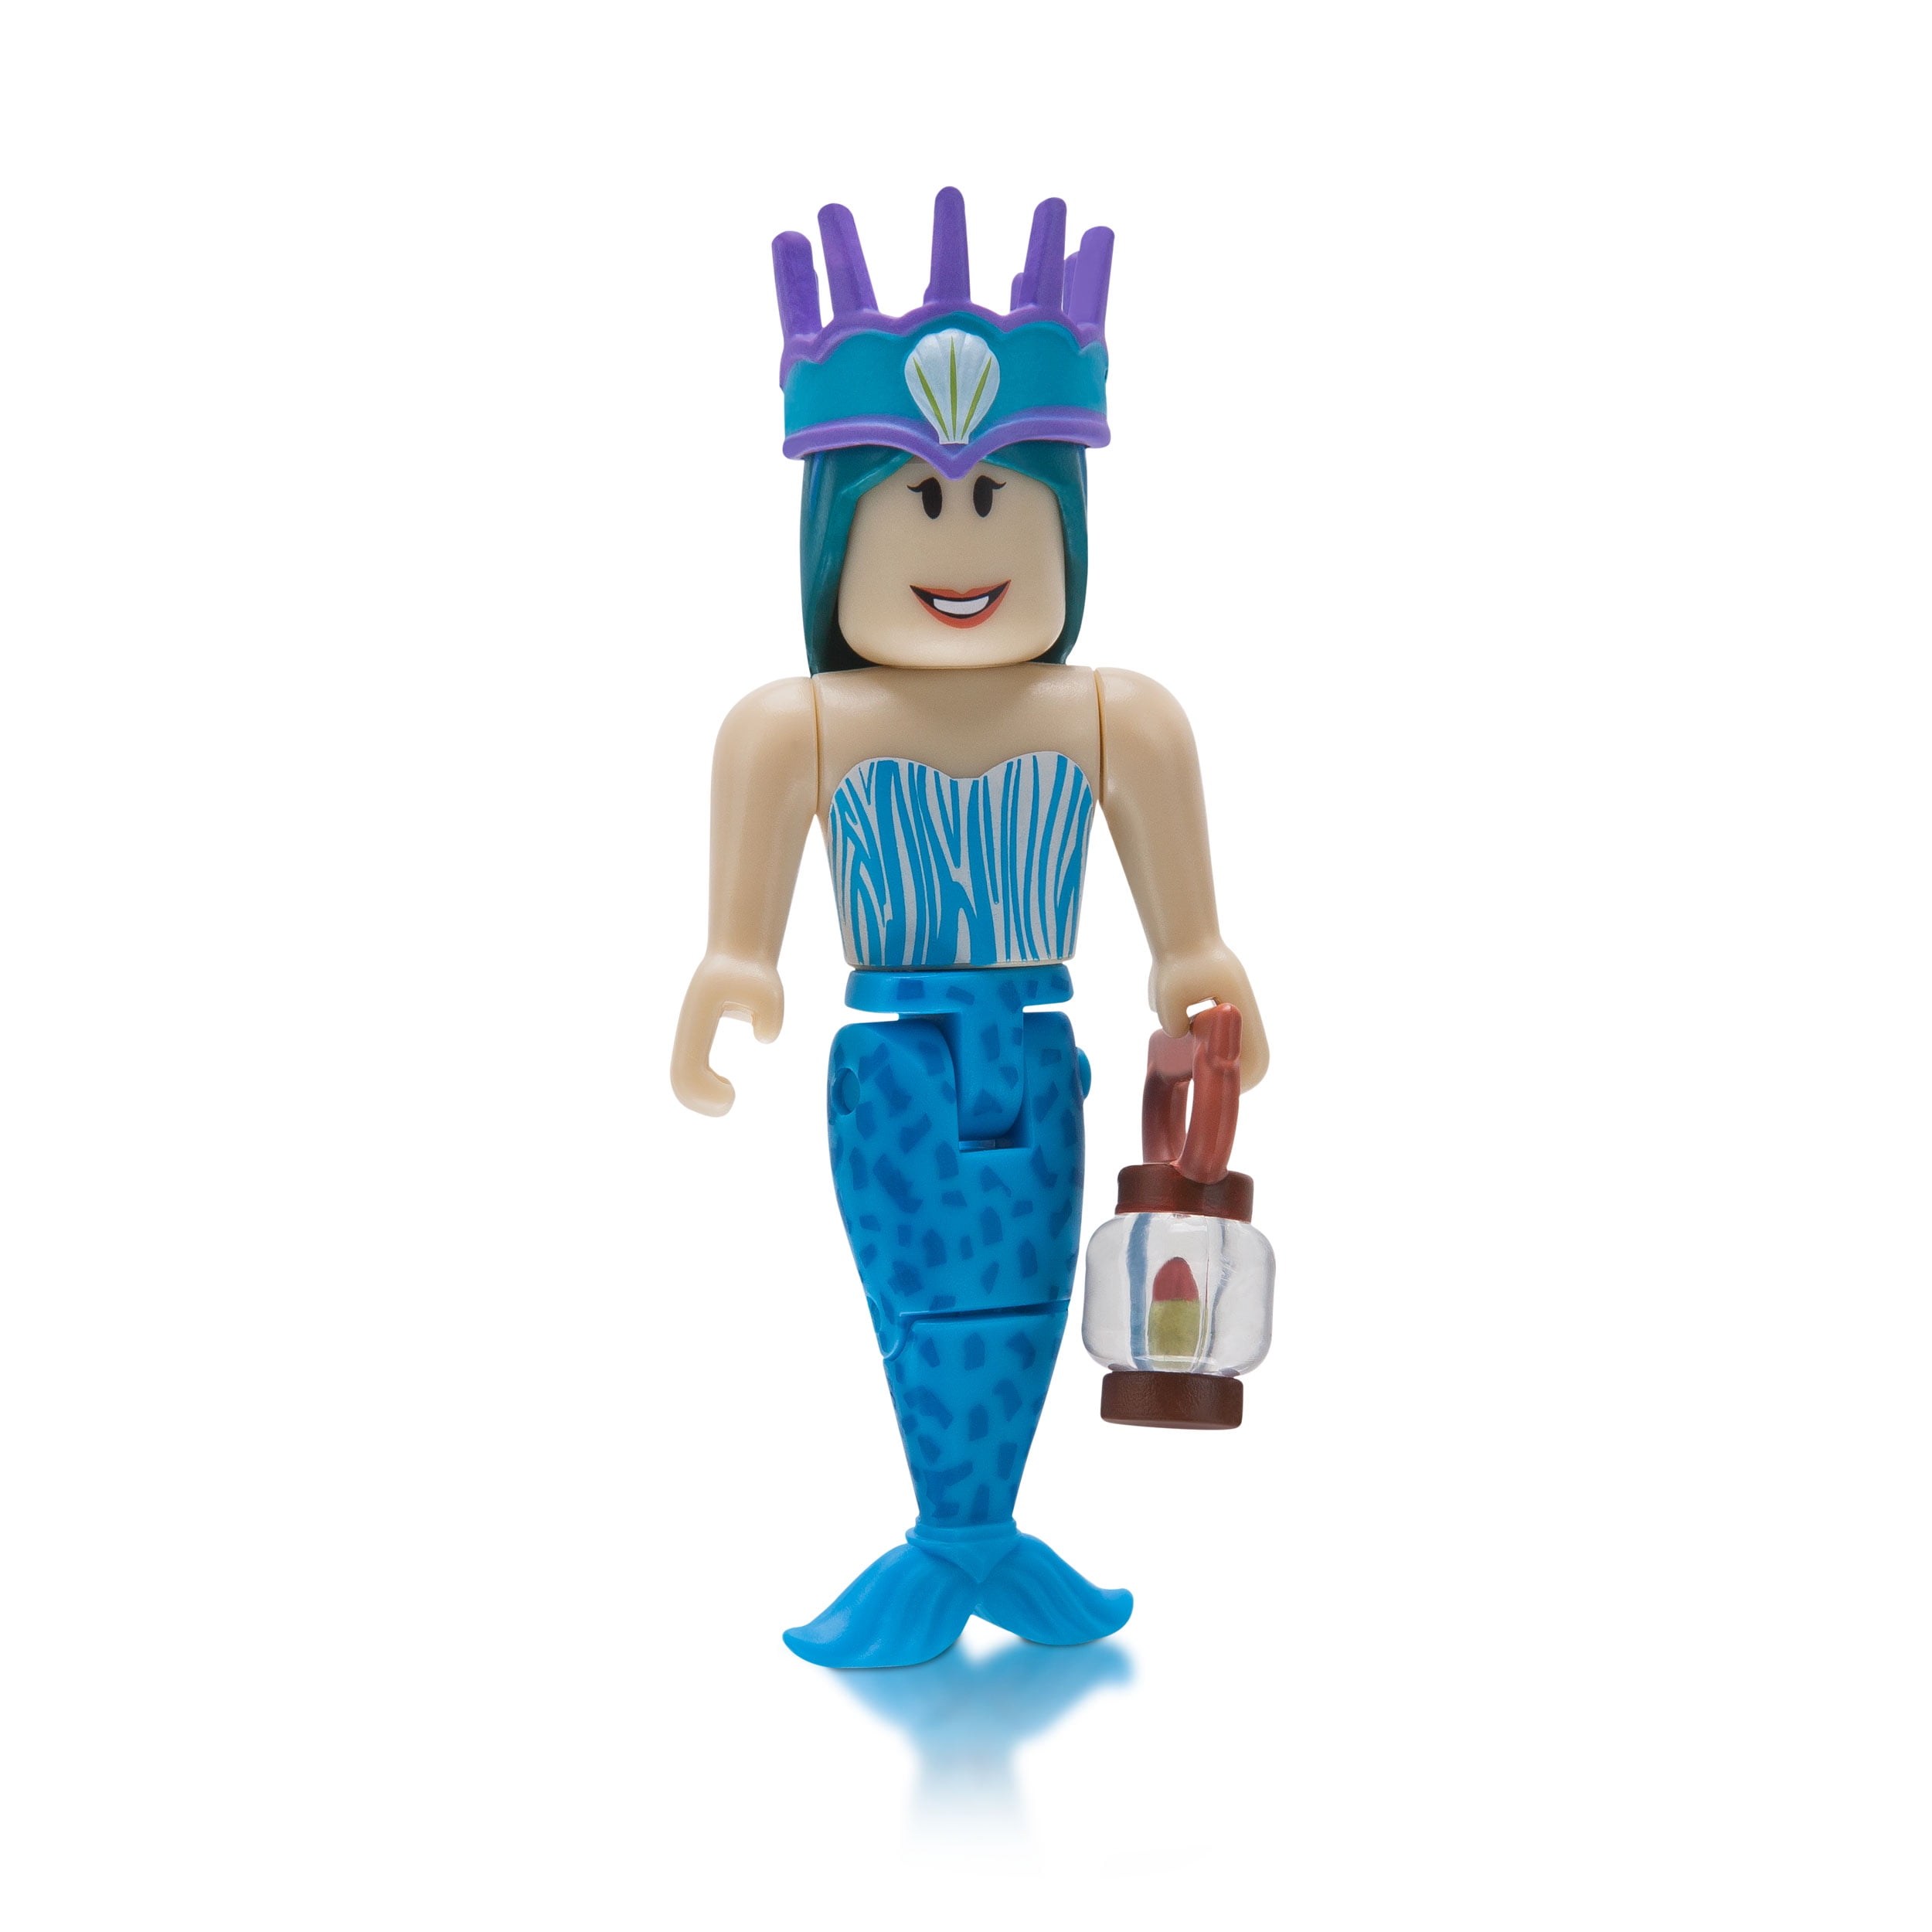 Roblox Celebrity Collection Neverland Lagoon Crown Collector Figure Pack Includes Exclusive Virtual Item Walmart Com Walmart Com - slime crown roblox